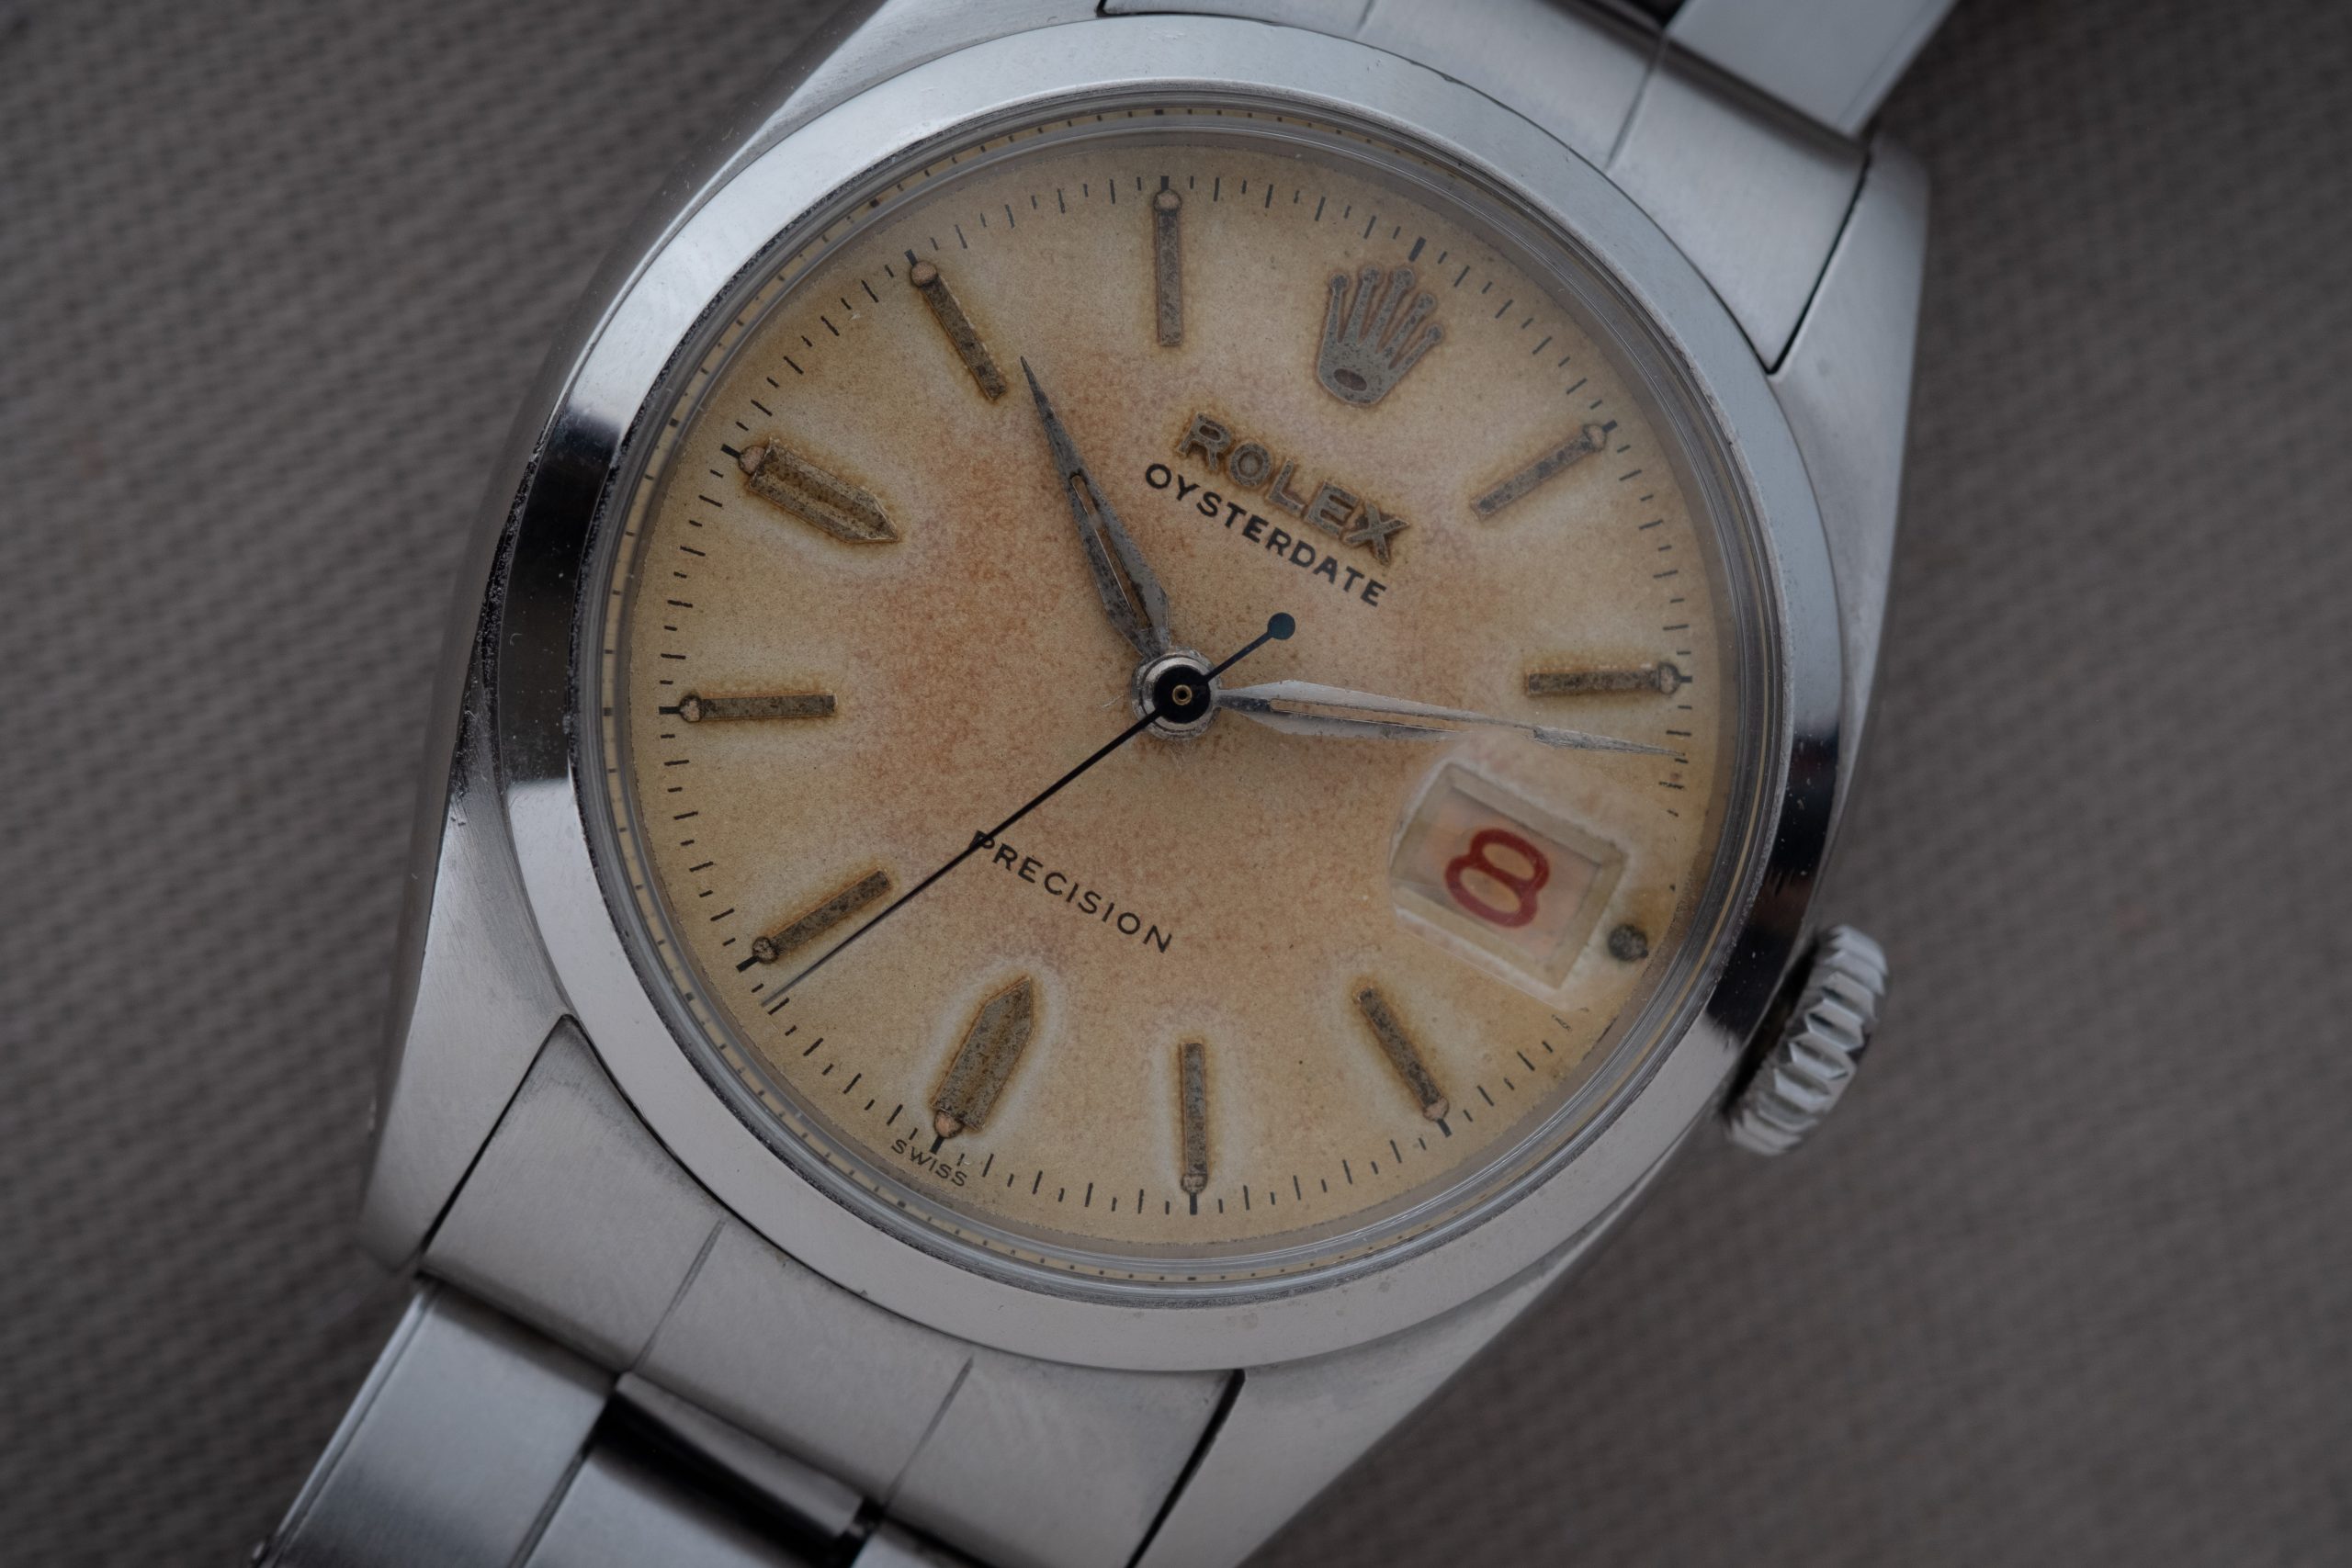 <span class='btd-post-cat-branding'>Curating the Collection </span>– A Rolex Oyster Date Reference 6494 Captures My Heart